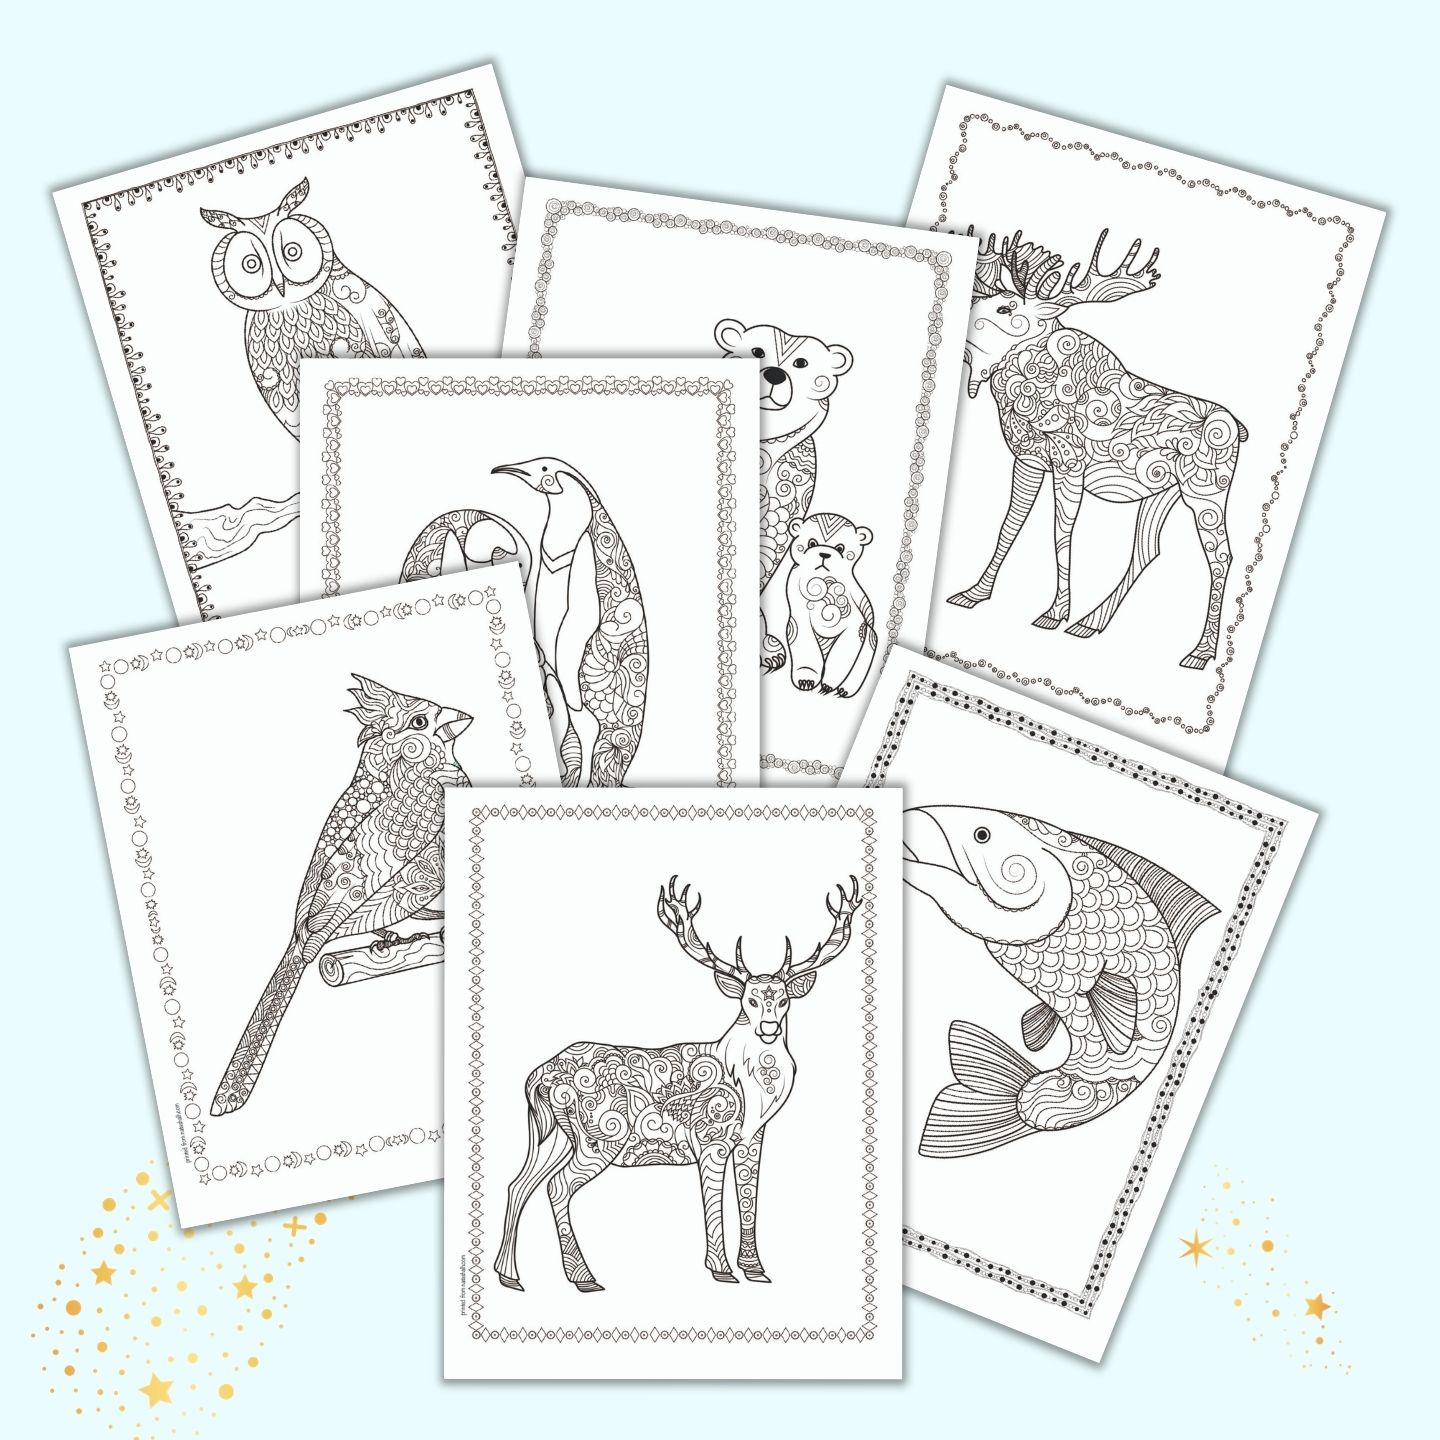 20+ Free Printable Winter Animal Adult Coloring Pages   The ...